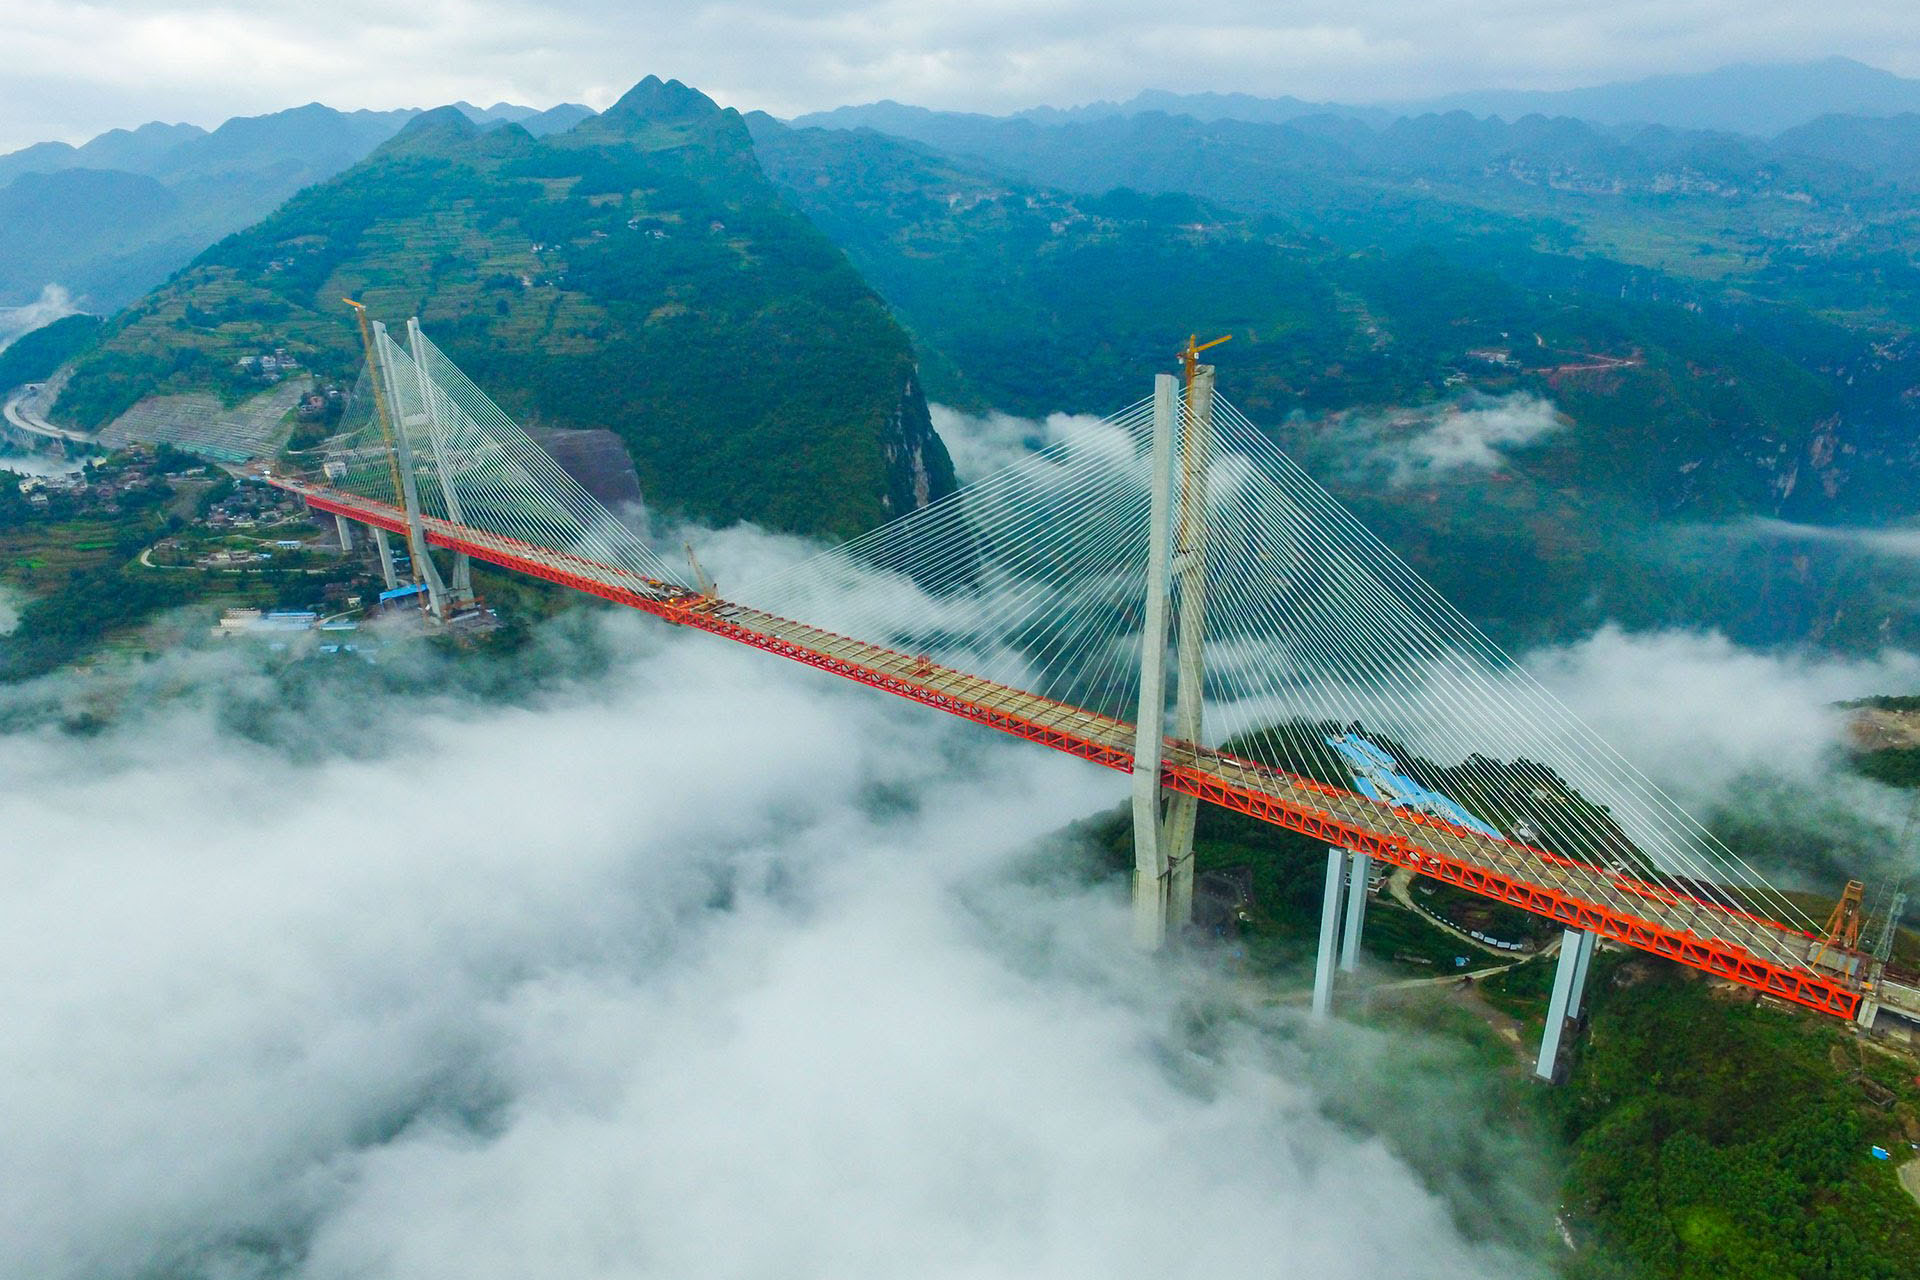 The world's highest bridge was opened in China